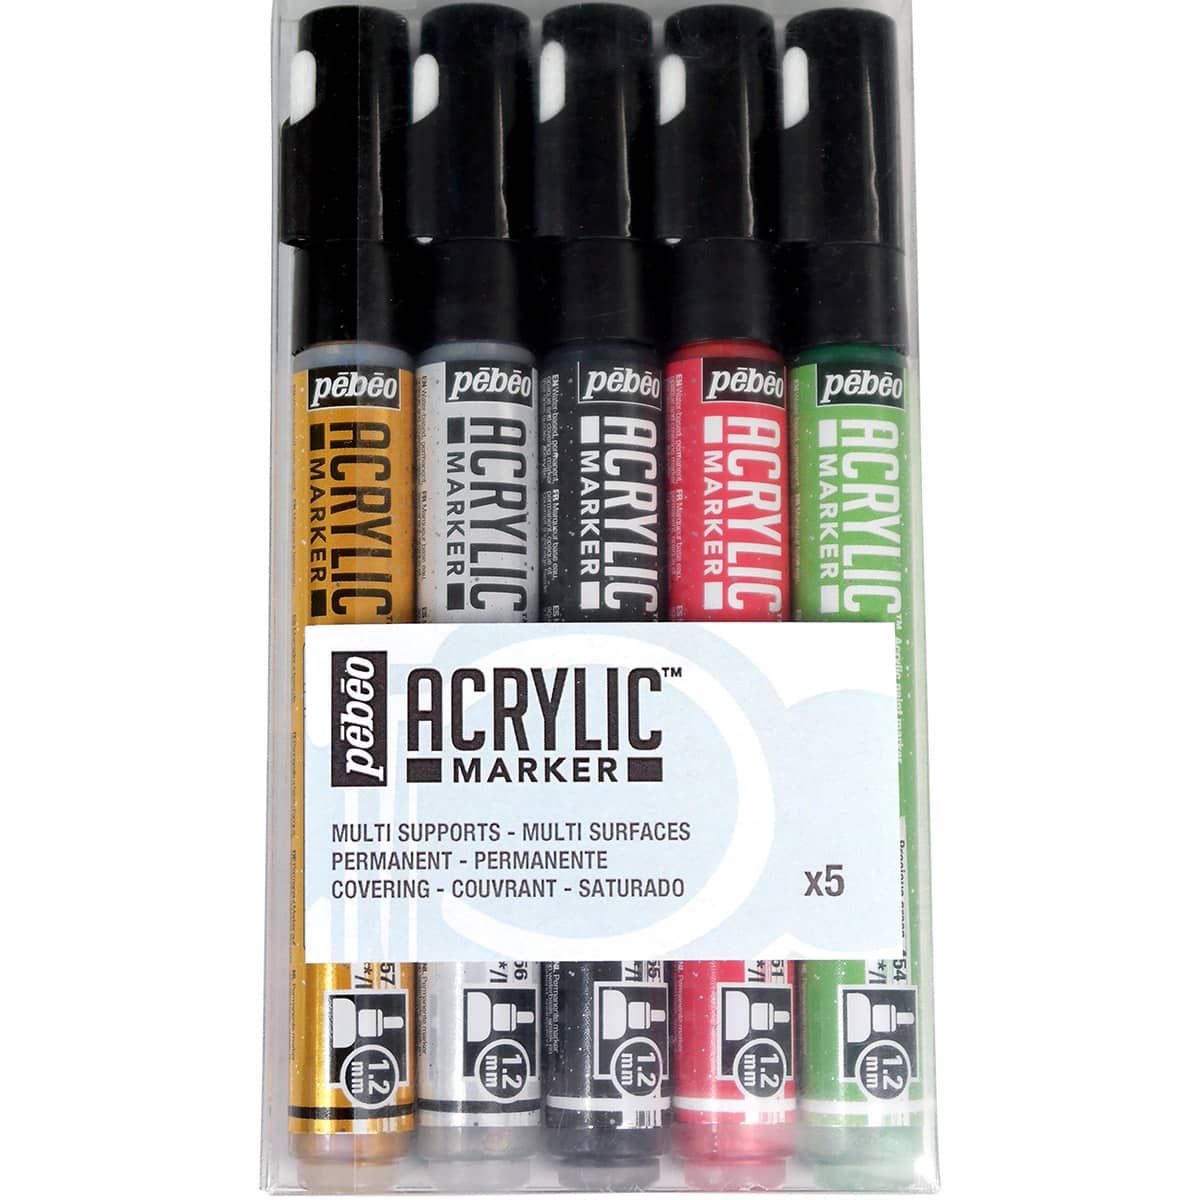 Acrylic Marker Set of 5 with a 1.2 mm tip in Gold, Silver, Black, Red, and Green.